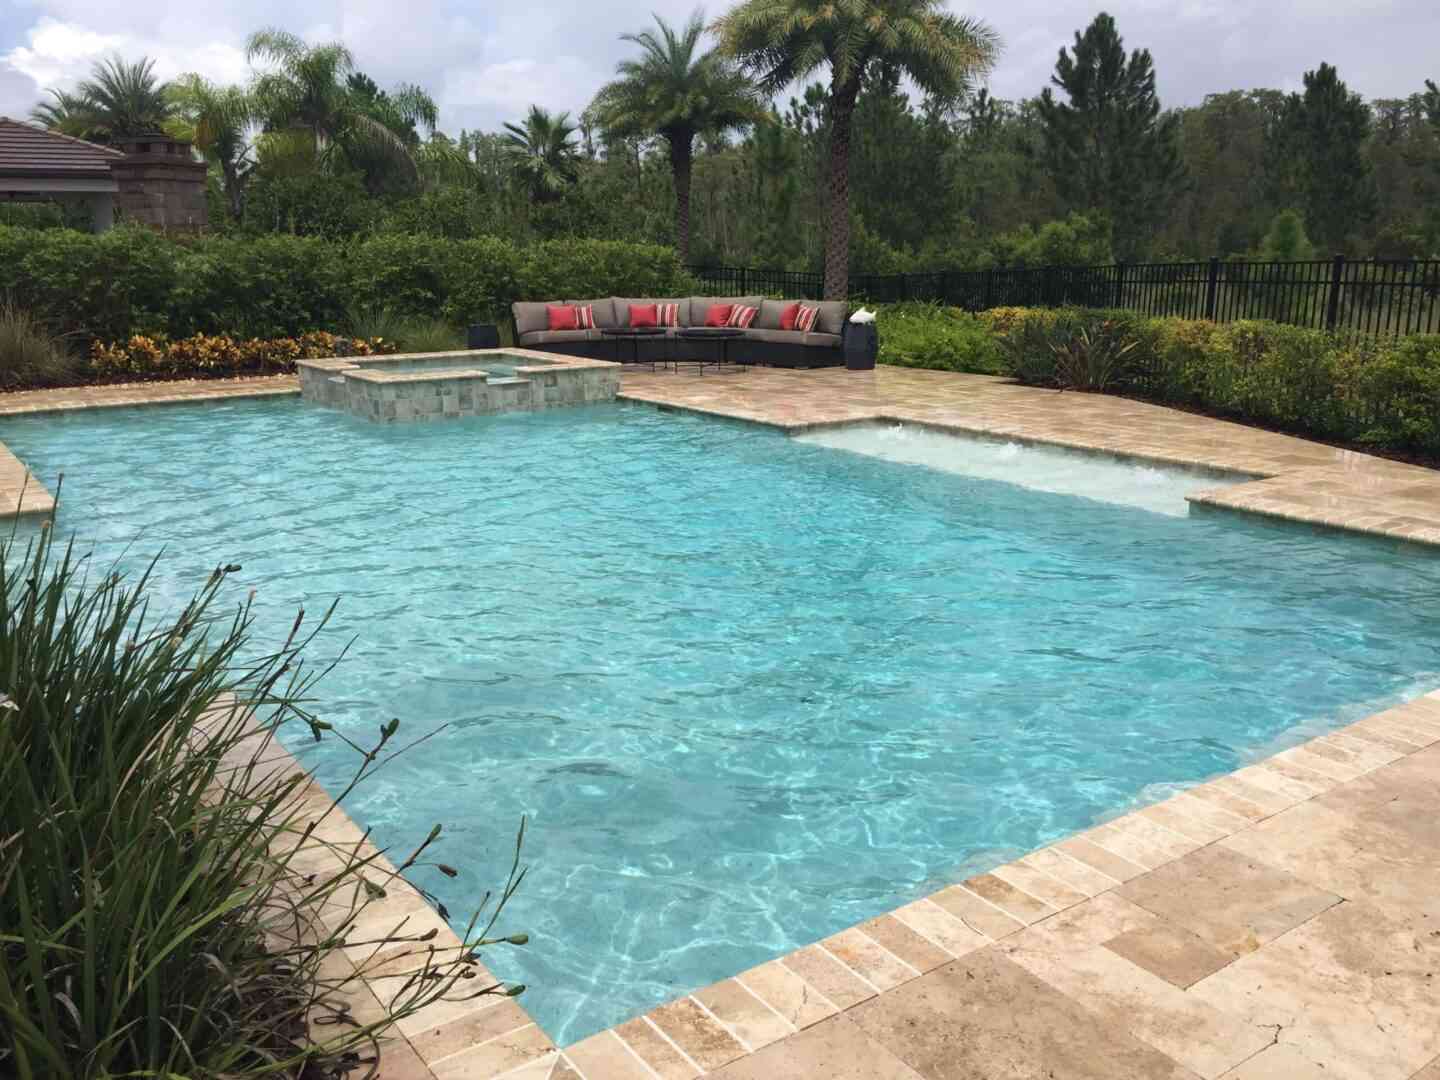 A large outdoor pool with a lounge area